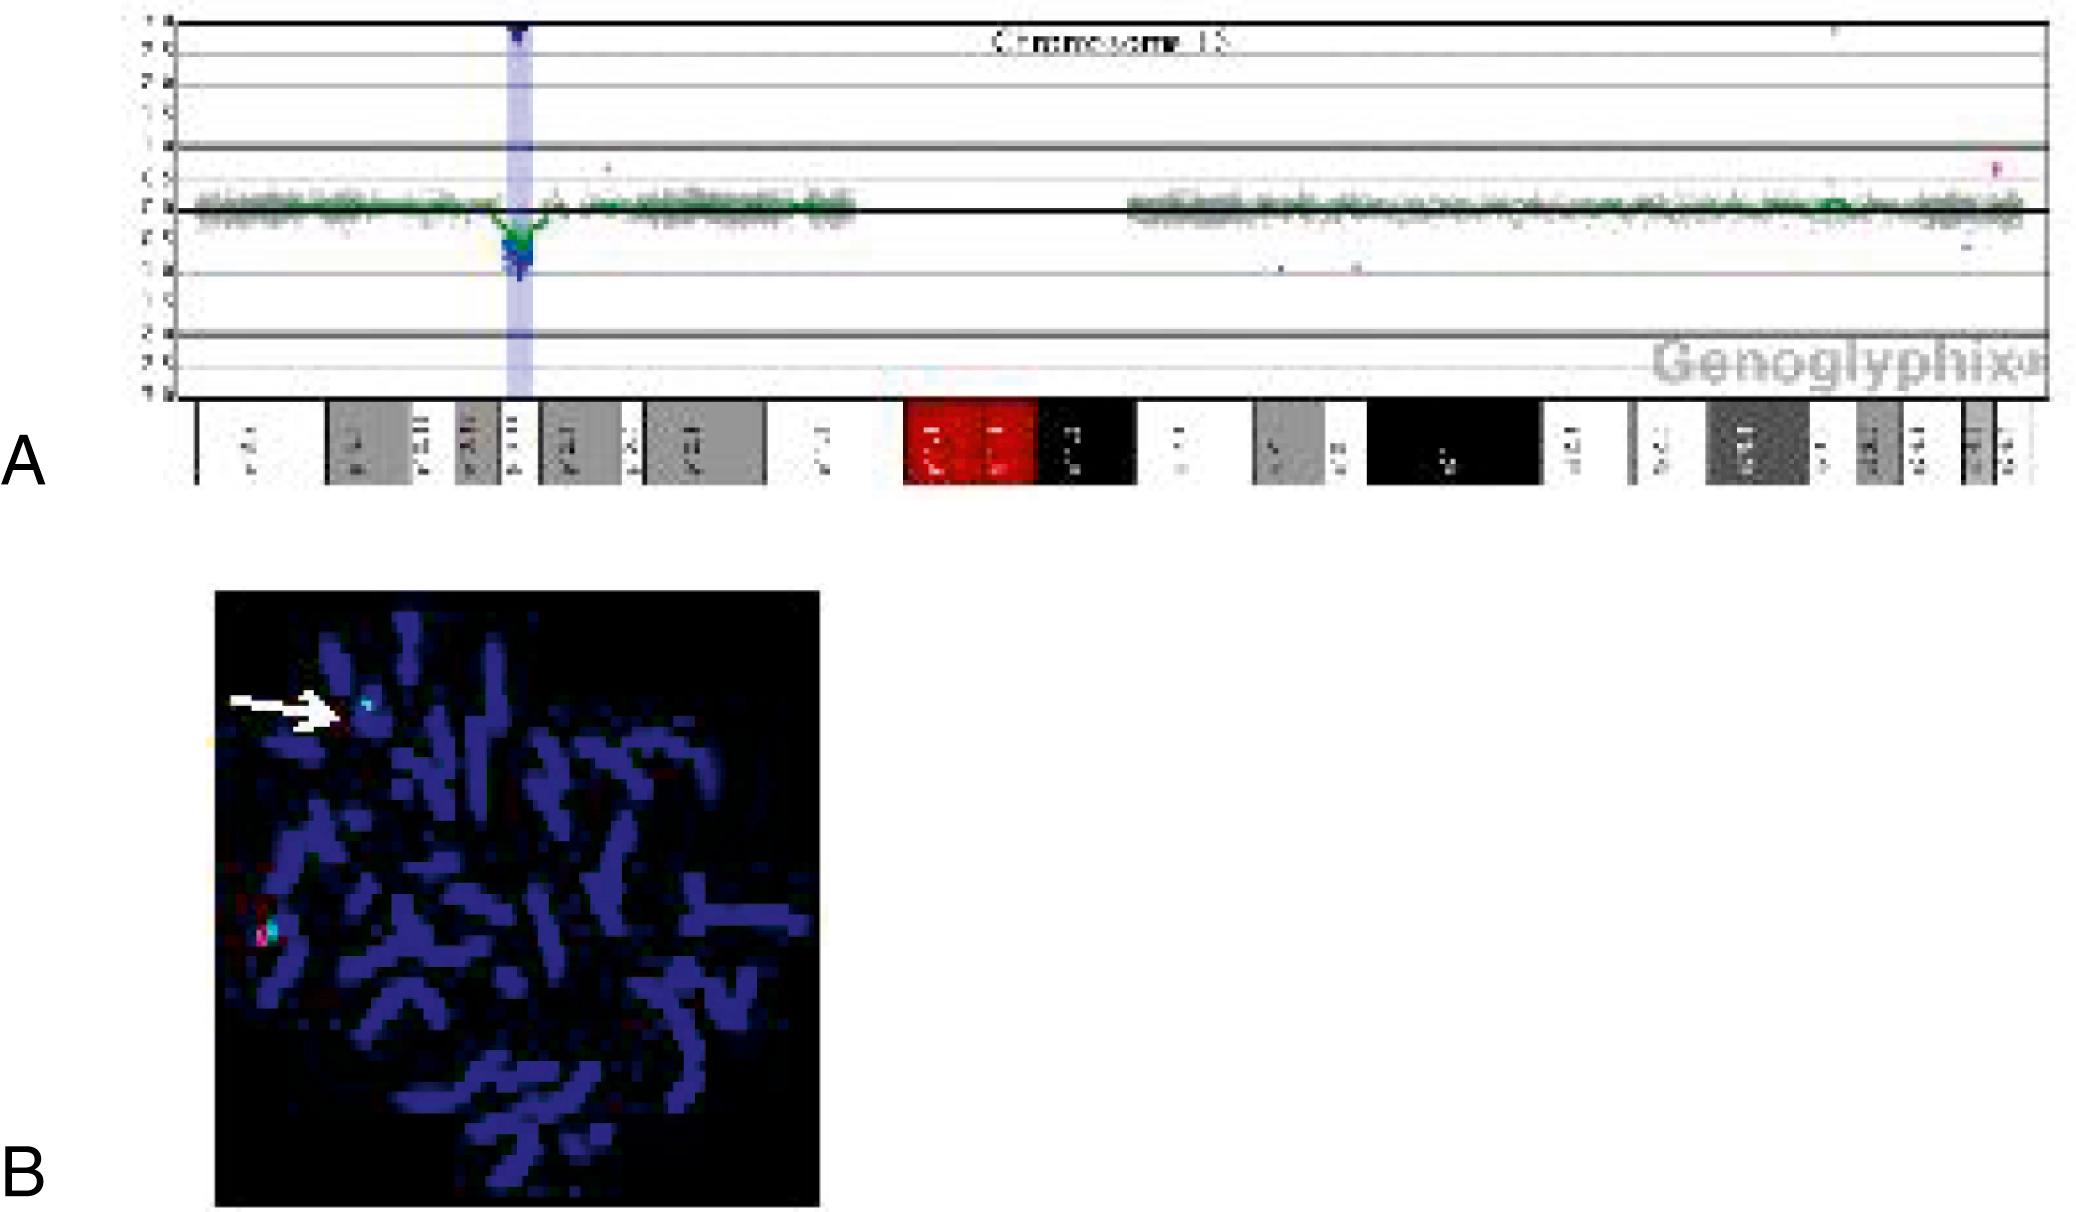 eFig. 1.3, (A) Microarray characterization of 16p13.11 deletion. Microarray plot shows a single-copy loss of 170 oligonucleotide probes from the short arm of chromosome 16 at 16p13.11. Probes are ordered on the x axis according to physical mapping positions, with the most distal p-arm probes to the left and the most distal q-arm probes to the right. Values along the y axis represent log 2 ratios of patient: control signal intensities. Results are visualized with Genoglyphix software (Signature Genomics, Spokane, WA). (B) Fluorescence in situ hybridization showing a deletion at 16p13.11. Probe 16p13.11 is labeled in red, and chromosome 16 centromere probe D16Z2 is labeled in green as a control. The presence of only one red signal indicates deletion of 16p13.11 on one homologue (arrow).